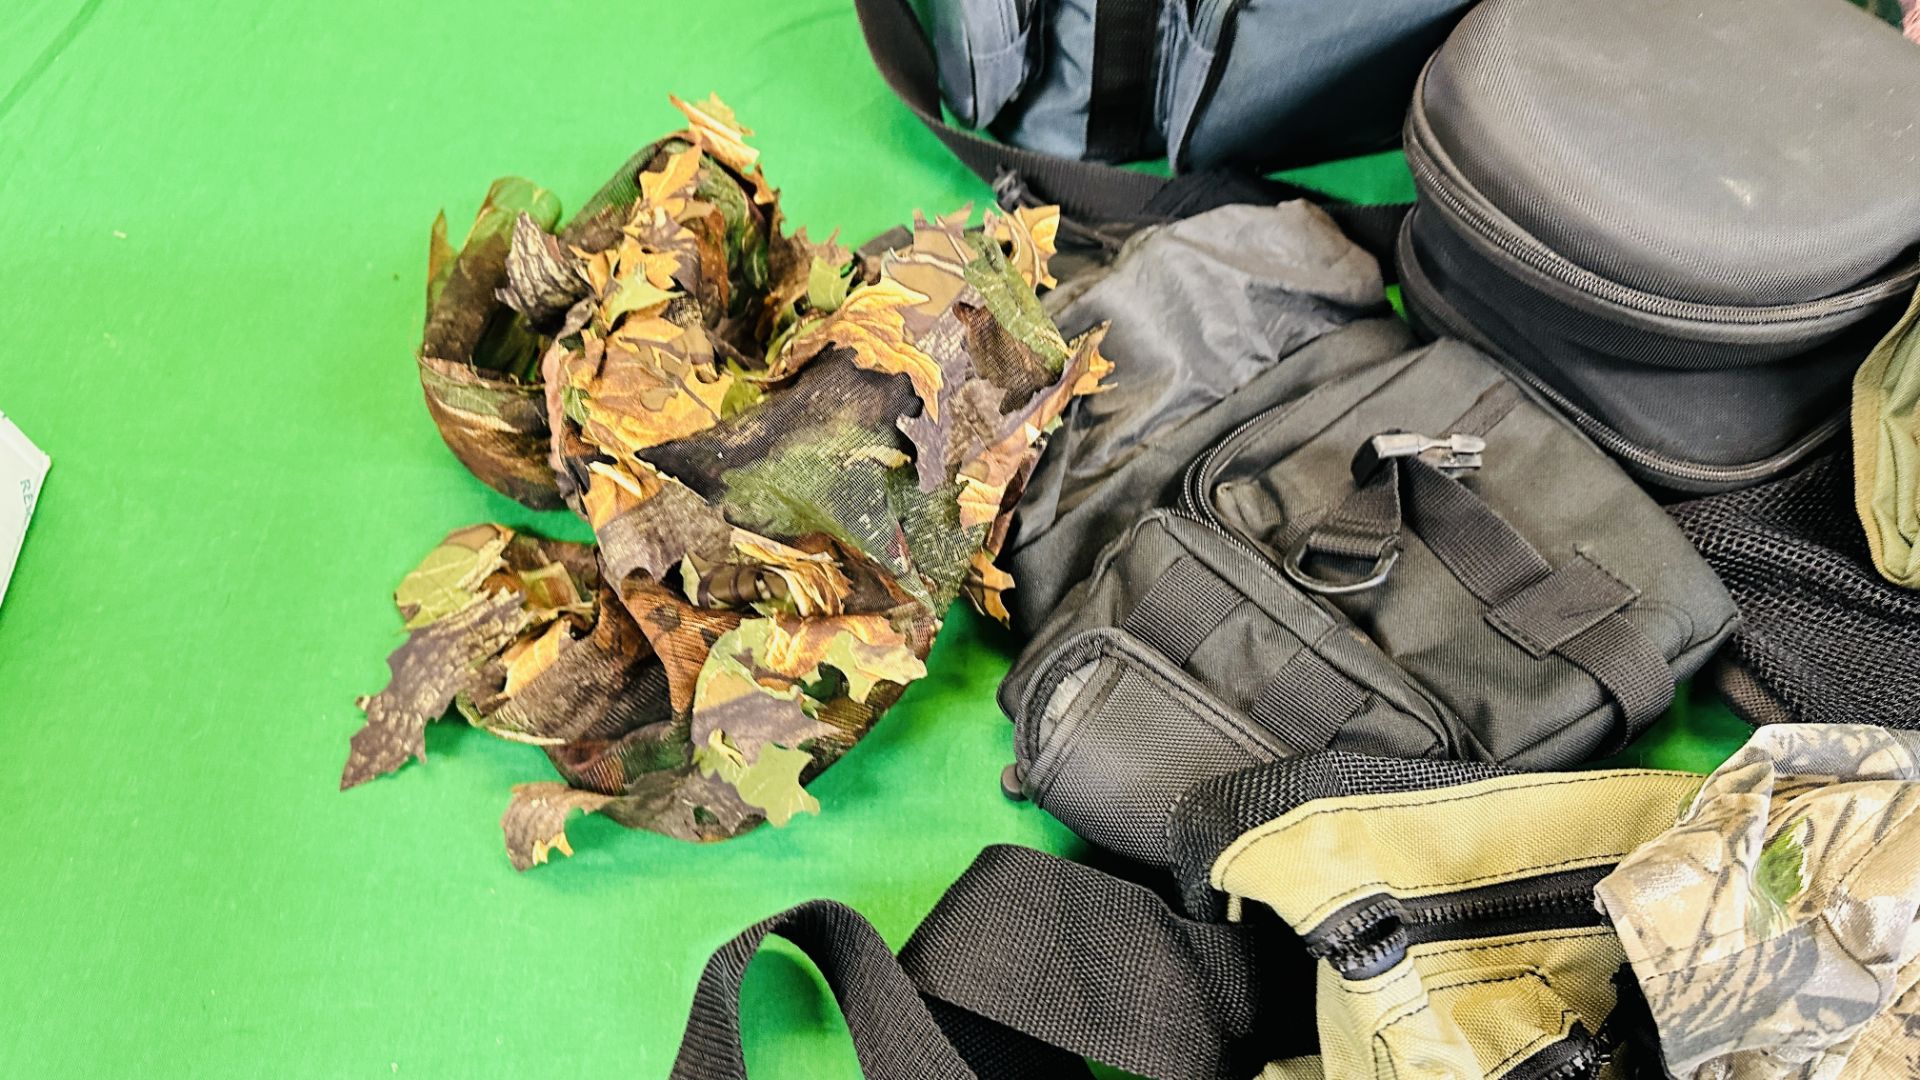 A GROUP OF SHOOTING ACCESSORIES TO INCLUDE 3-D SYNTHETIC CAMOUFLAGE COVER SUIT XL - 2XL, - Image 8 of 8